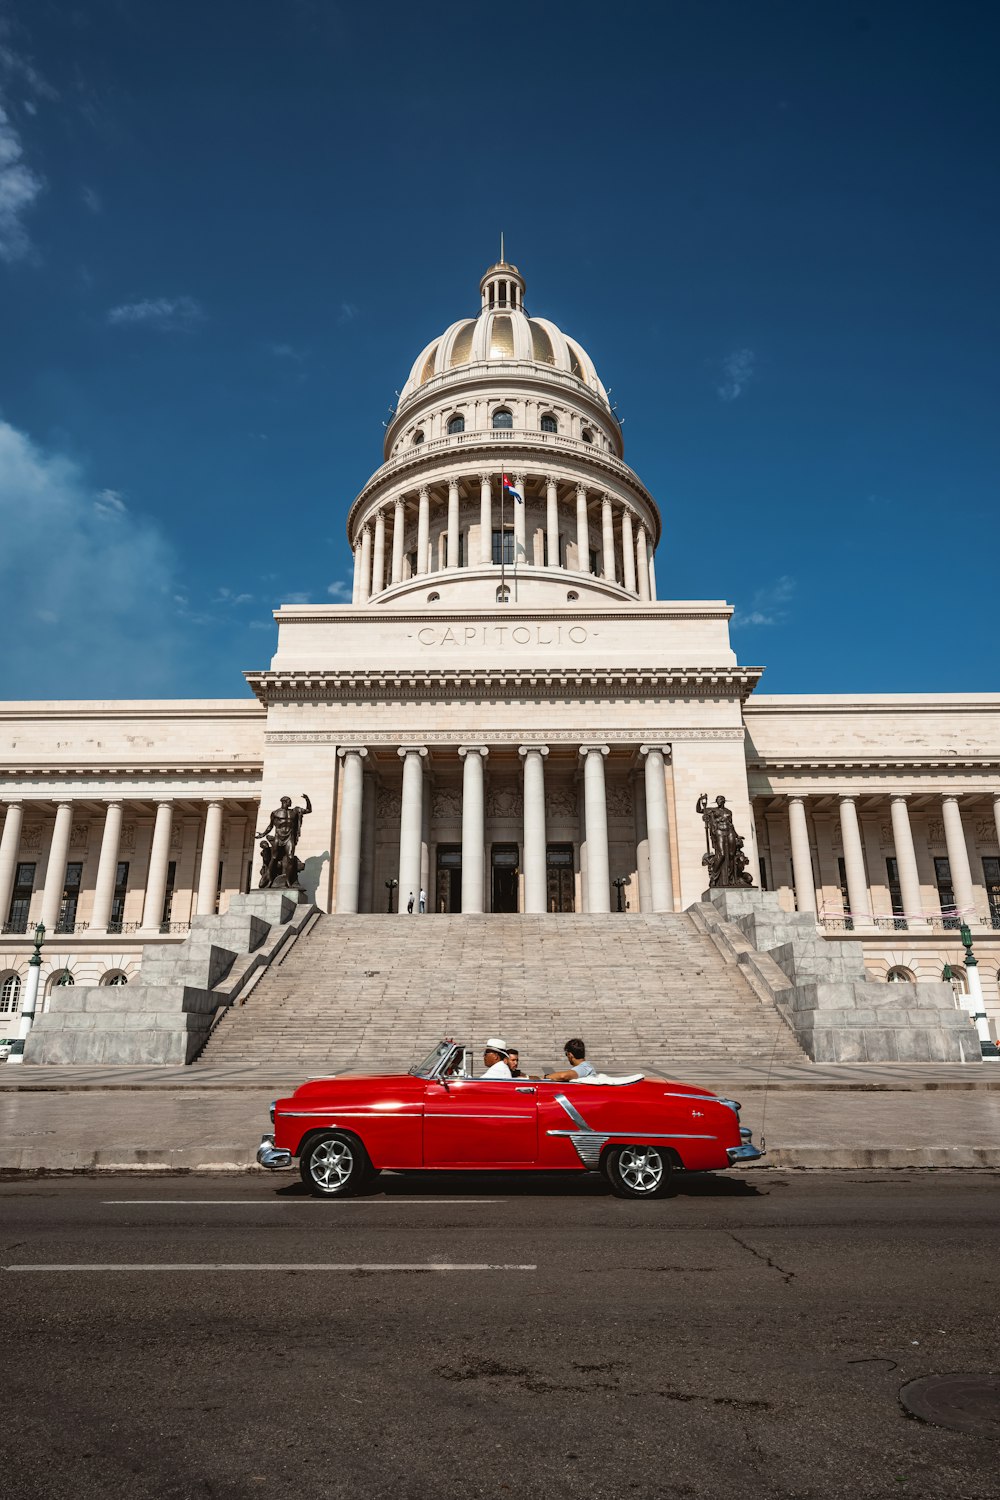 a red convertible car parked in front of the capitol building